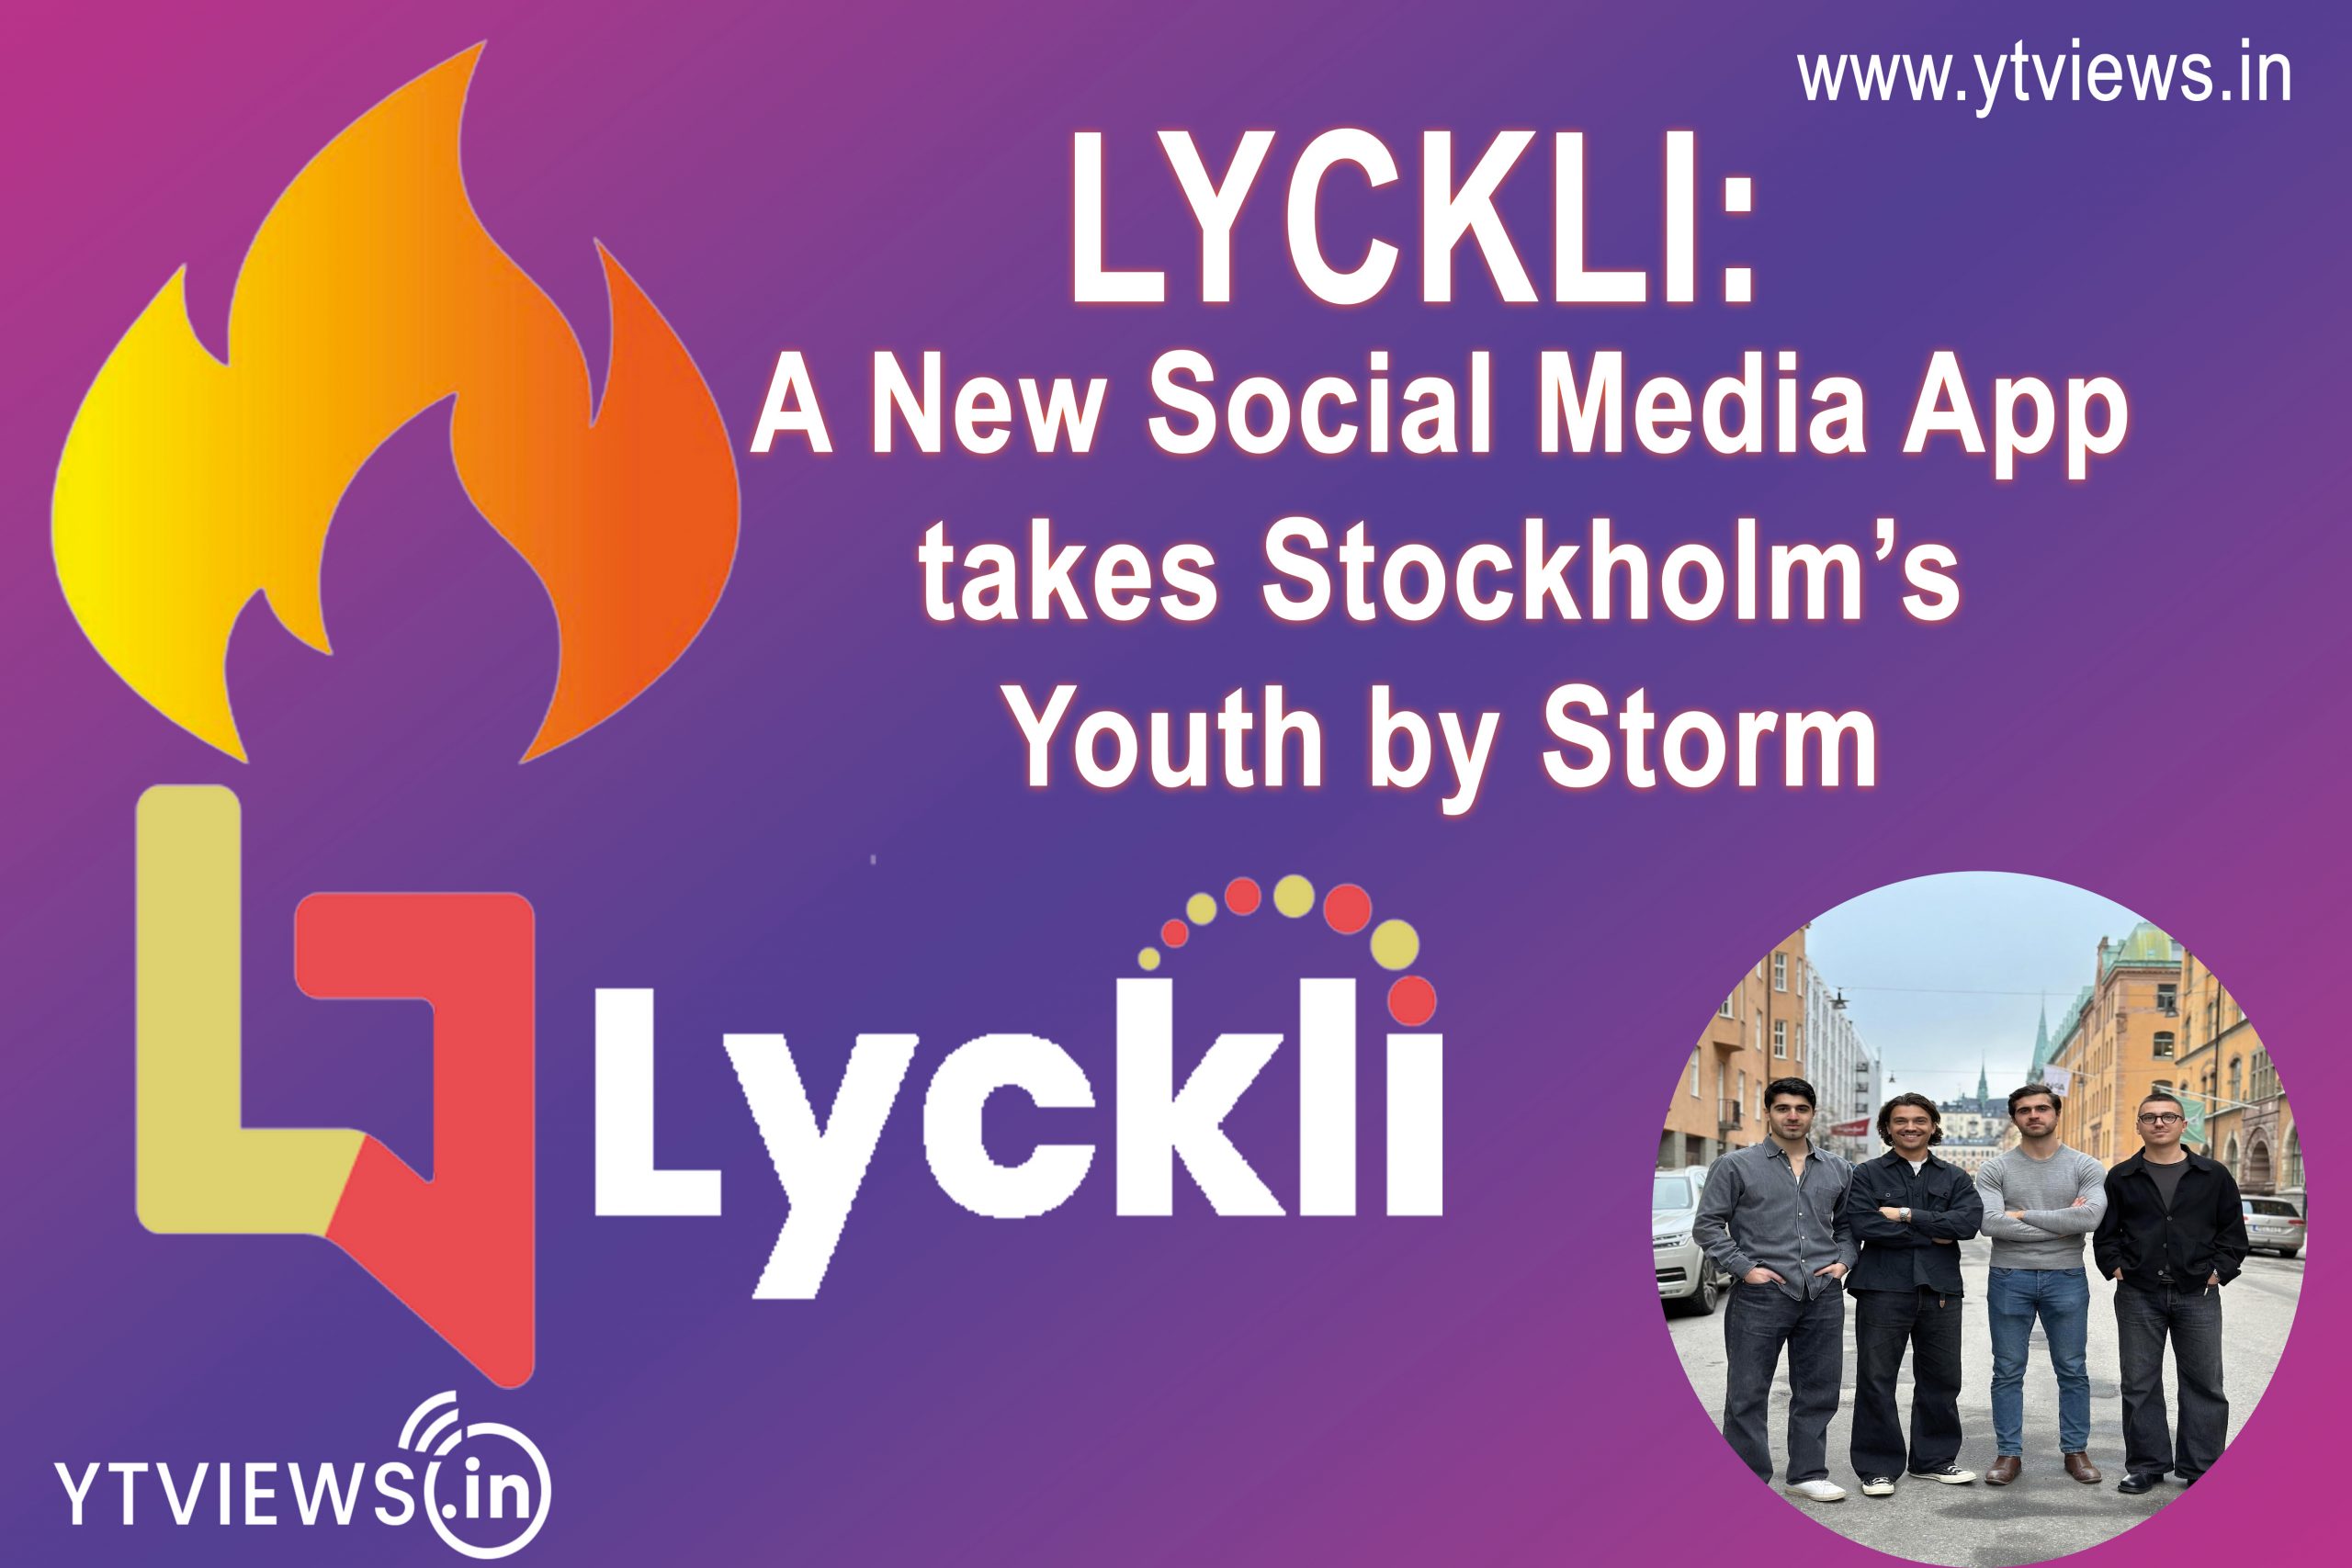 Lyckli; A New Social Media APP Takes Stockholm’s Youth by Storm